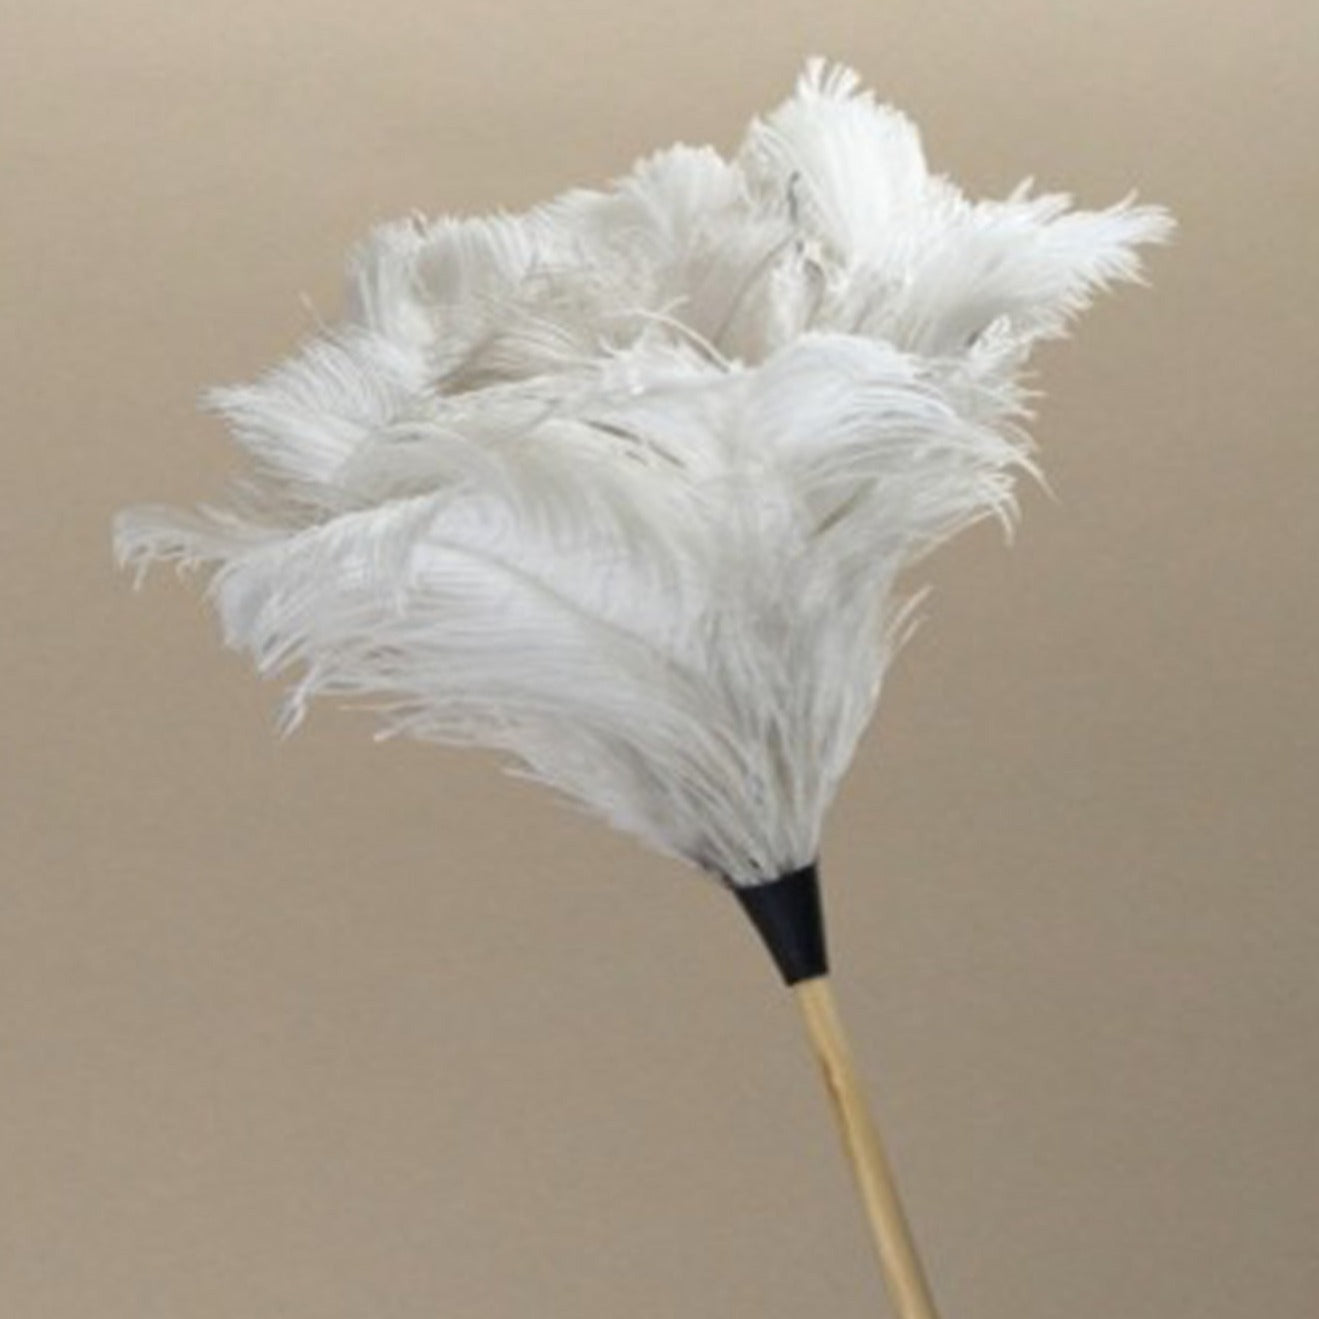 ostrich duster